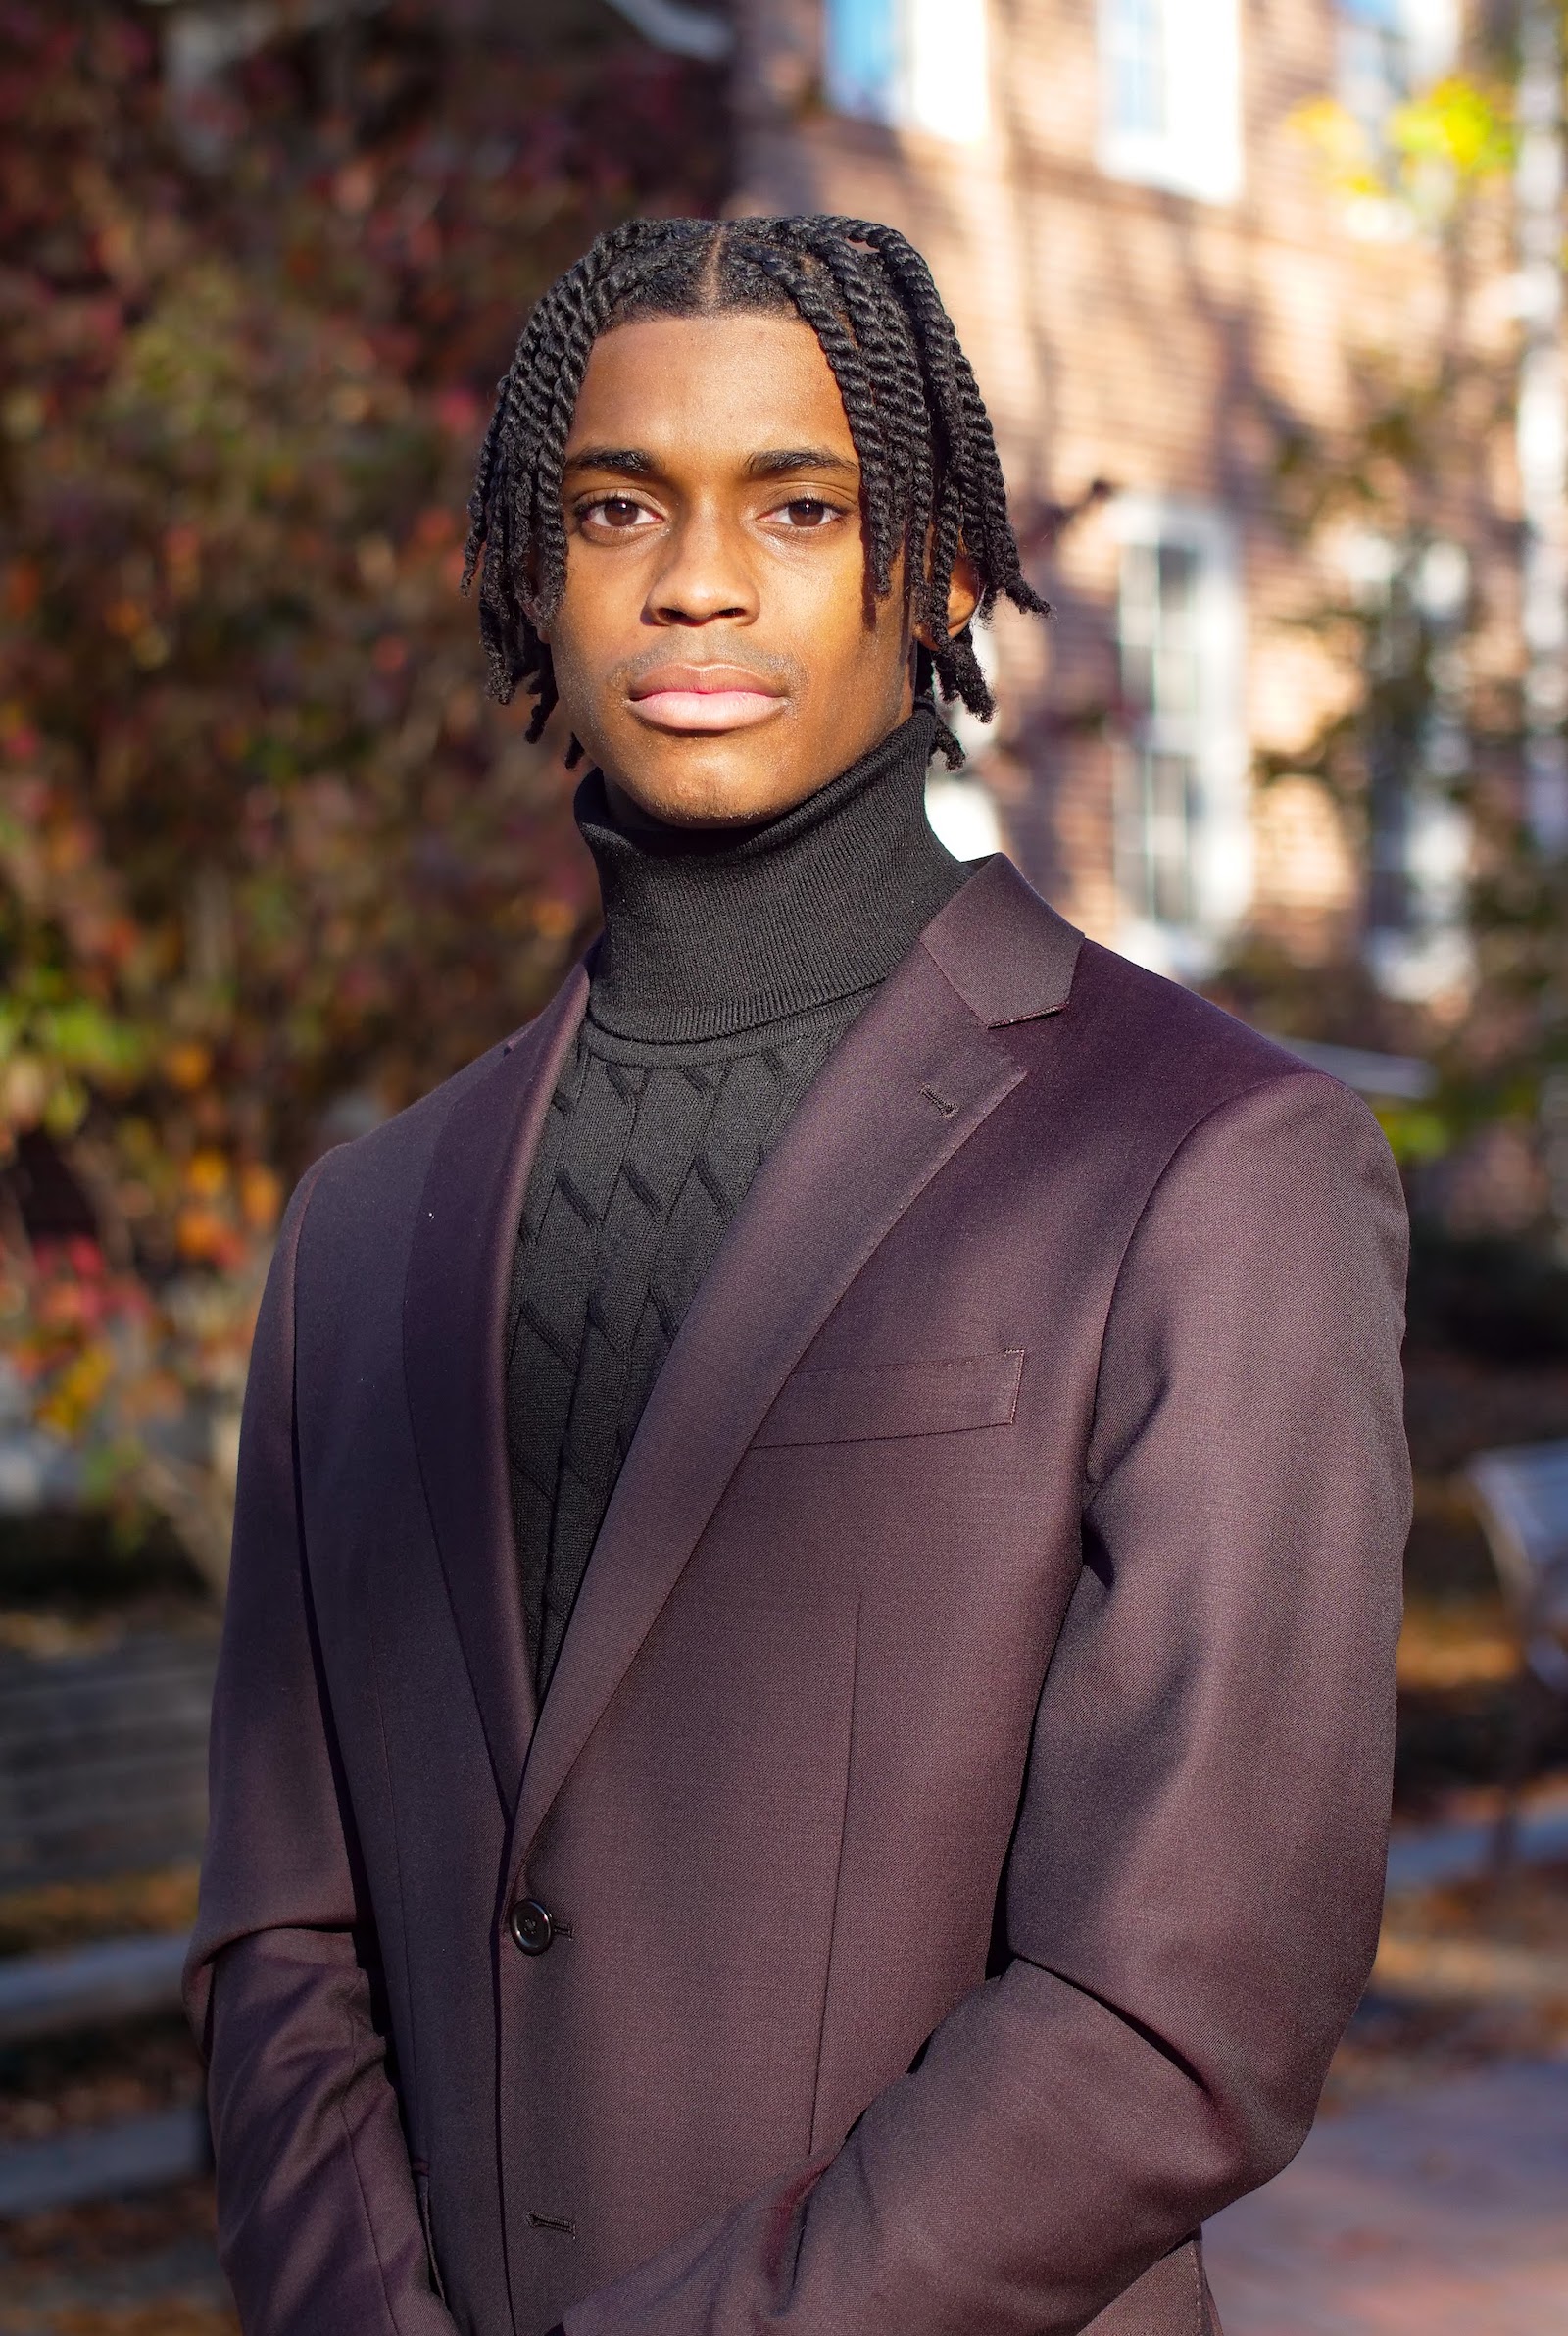 Jacques Crawford is the Fall 2021 reflection speaker for the bachelor's ceremony.